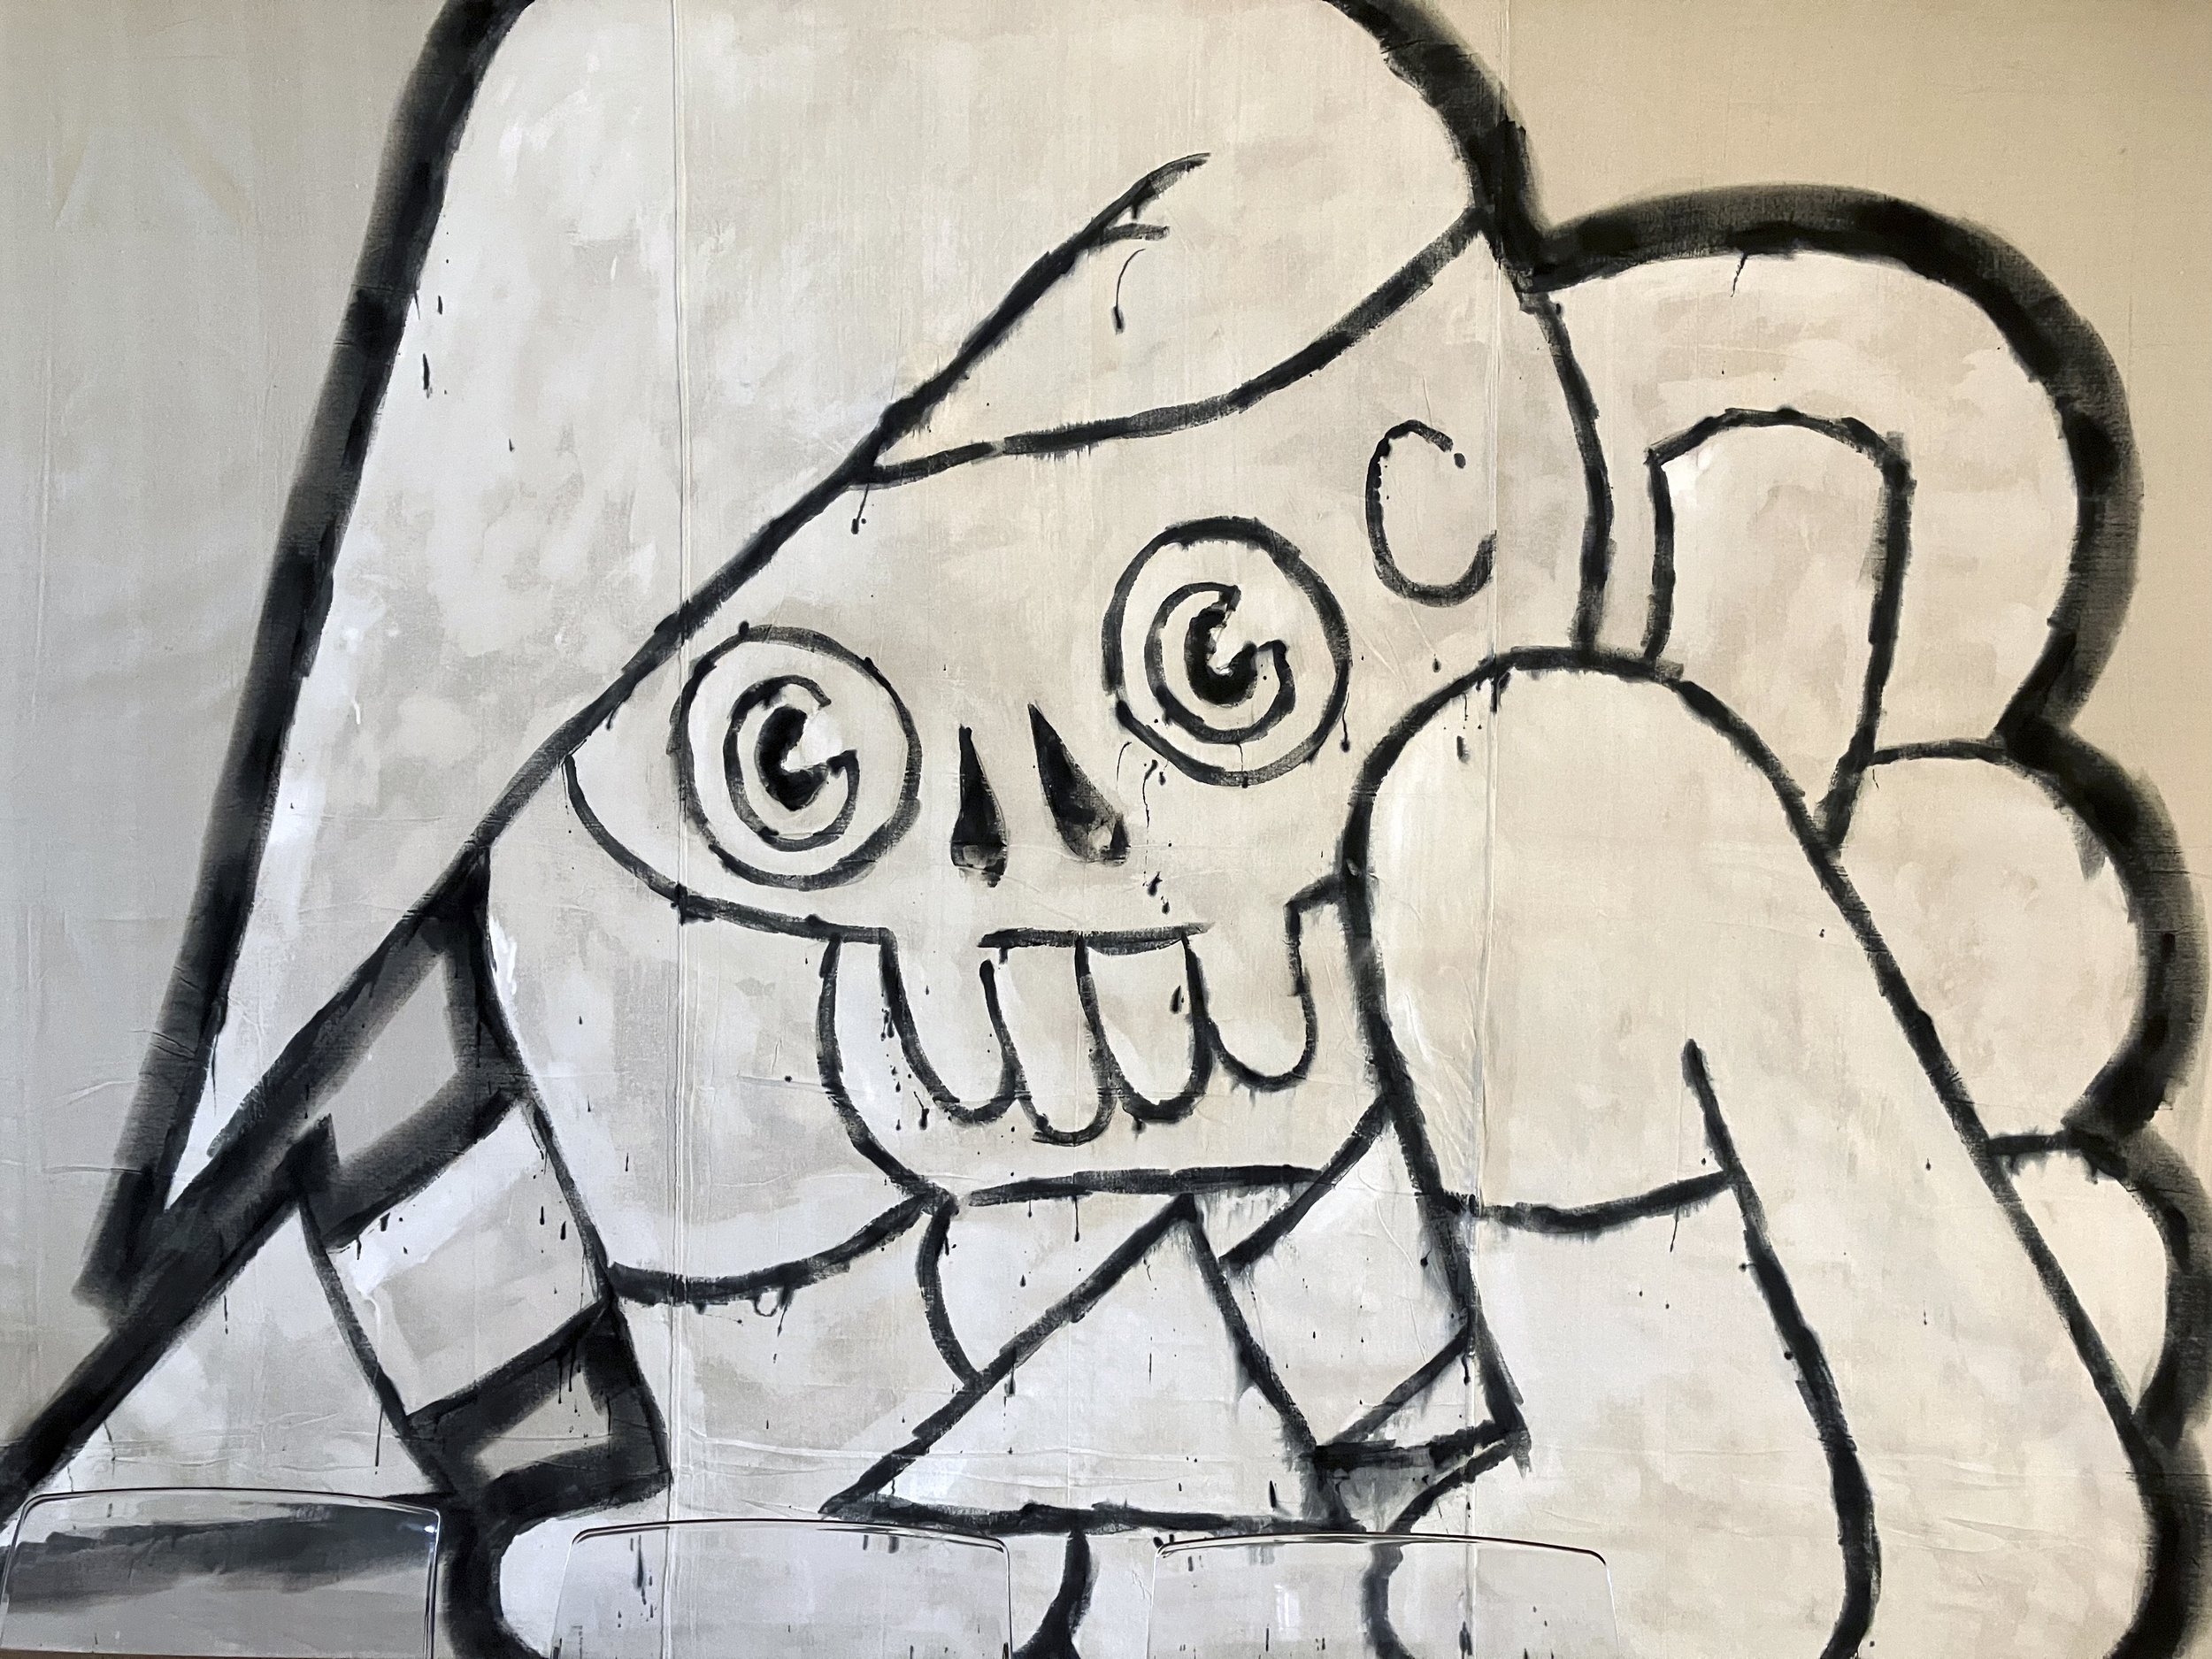   Trapped Skull Guy  acrylic on raw canvas. 12’ w x 9’ h 2023  exhibited -  Bailey Contemporary Arts during Fin 2023  